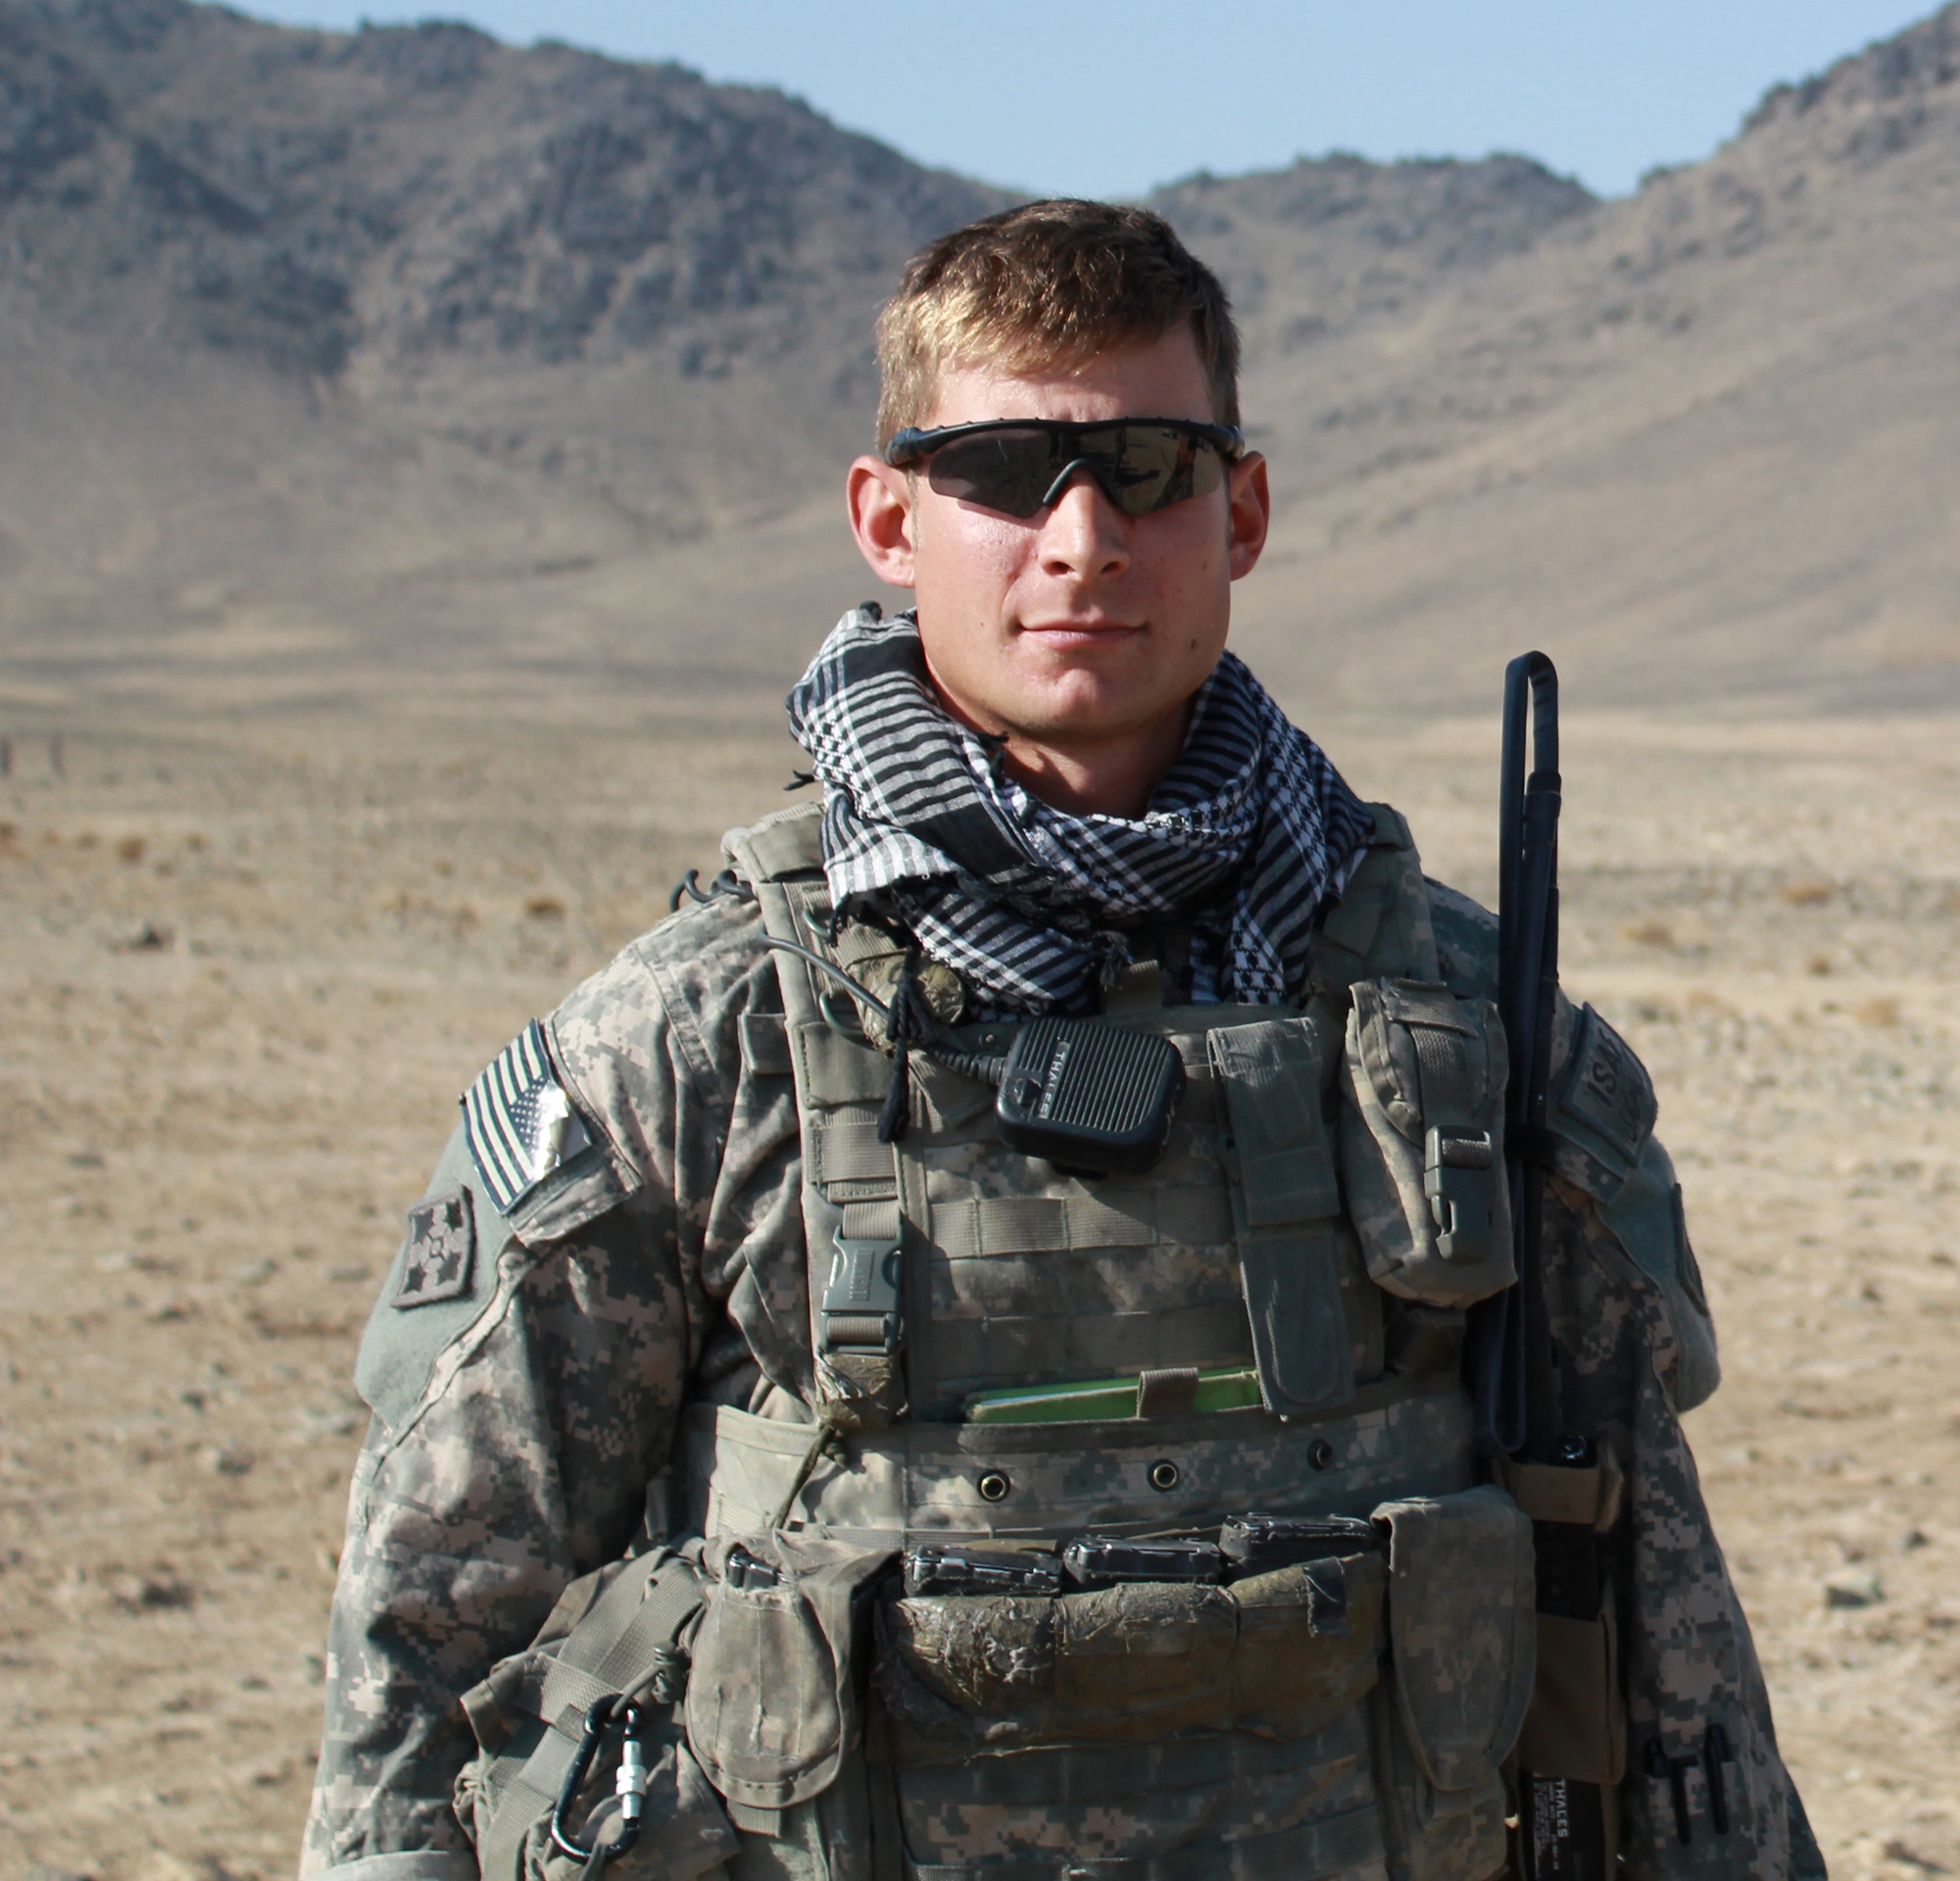 Jason Hartwig wearing military fatigues standing in a valley while deployed on duty.